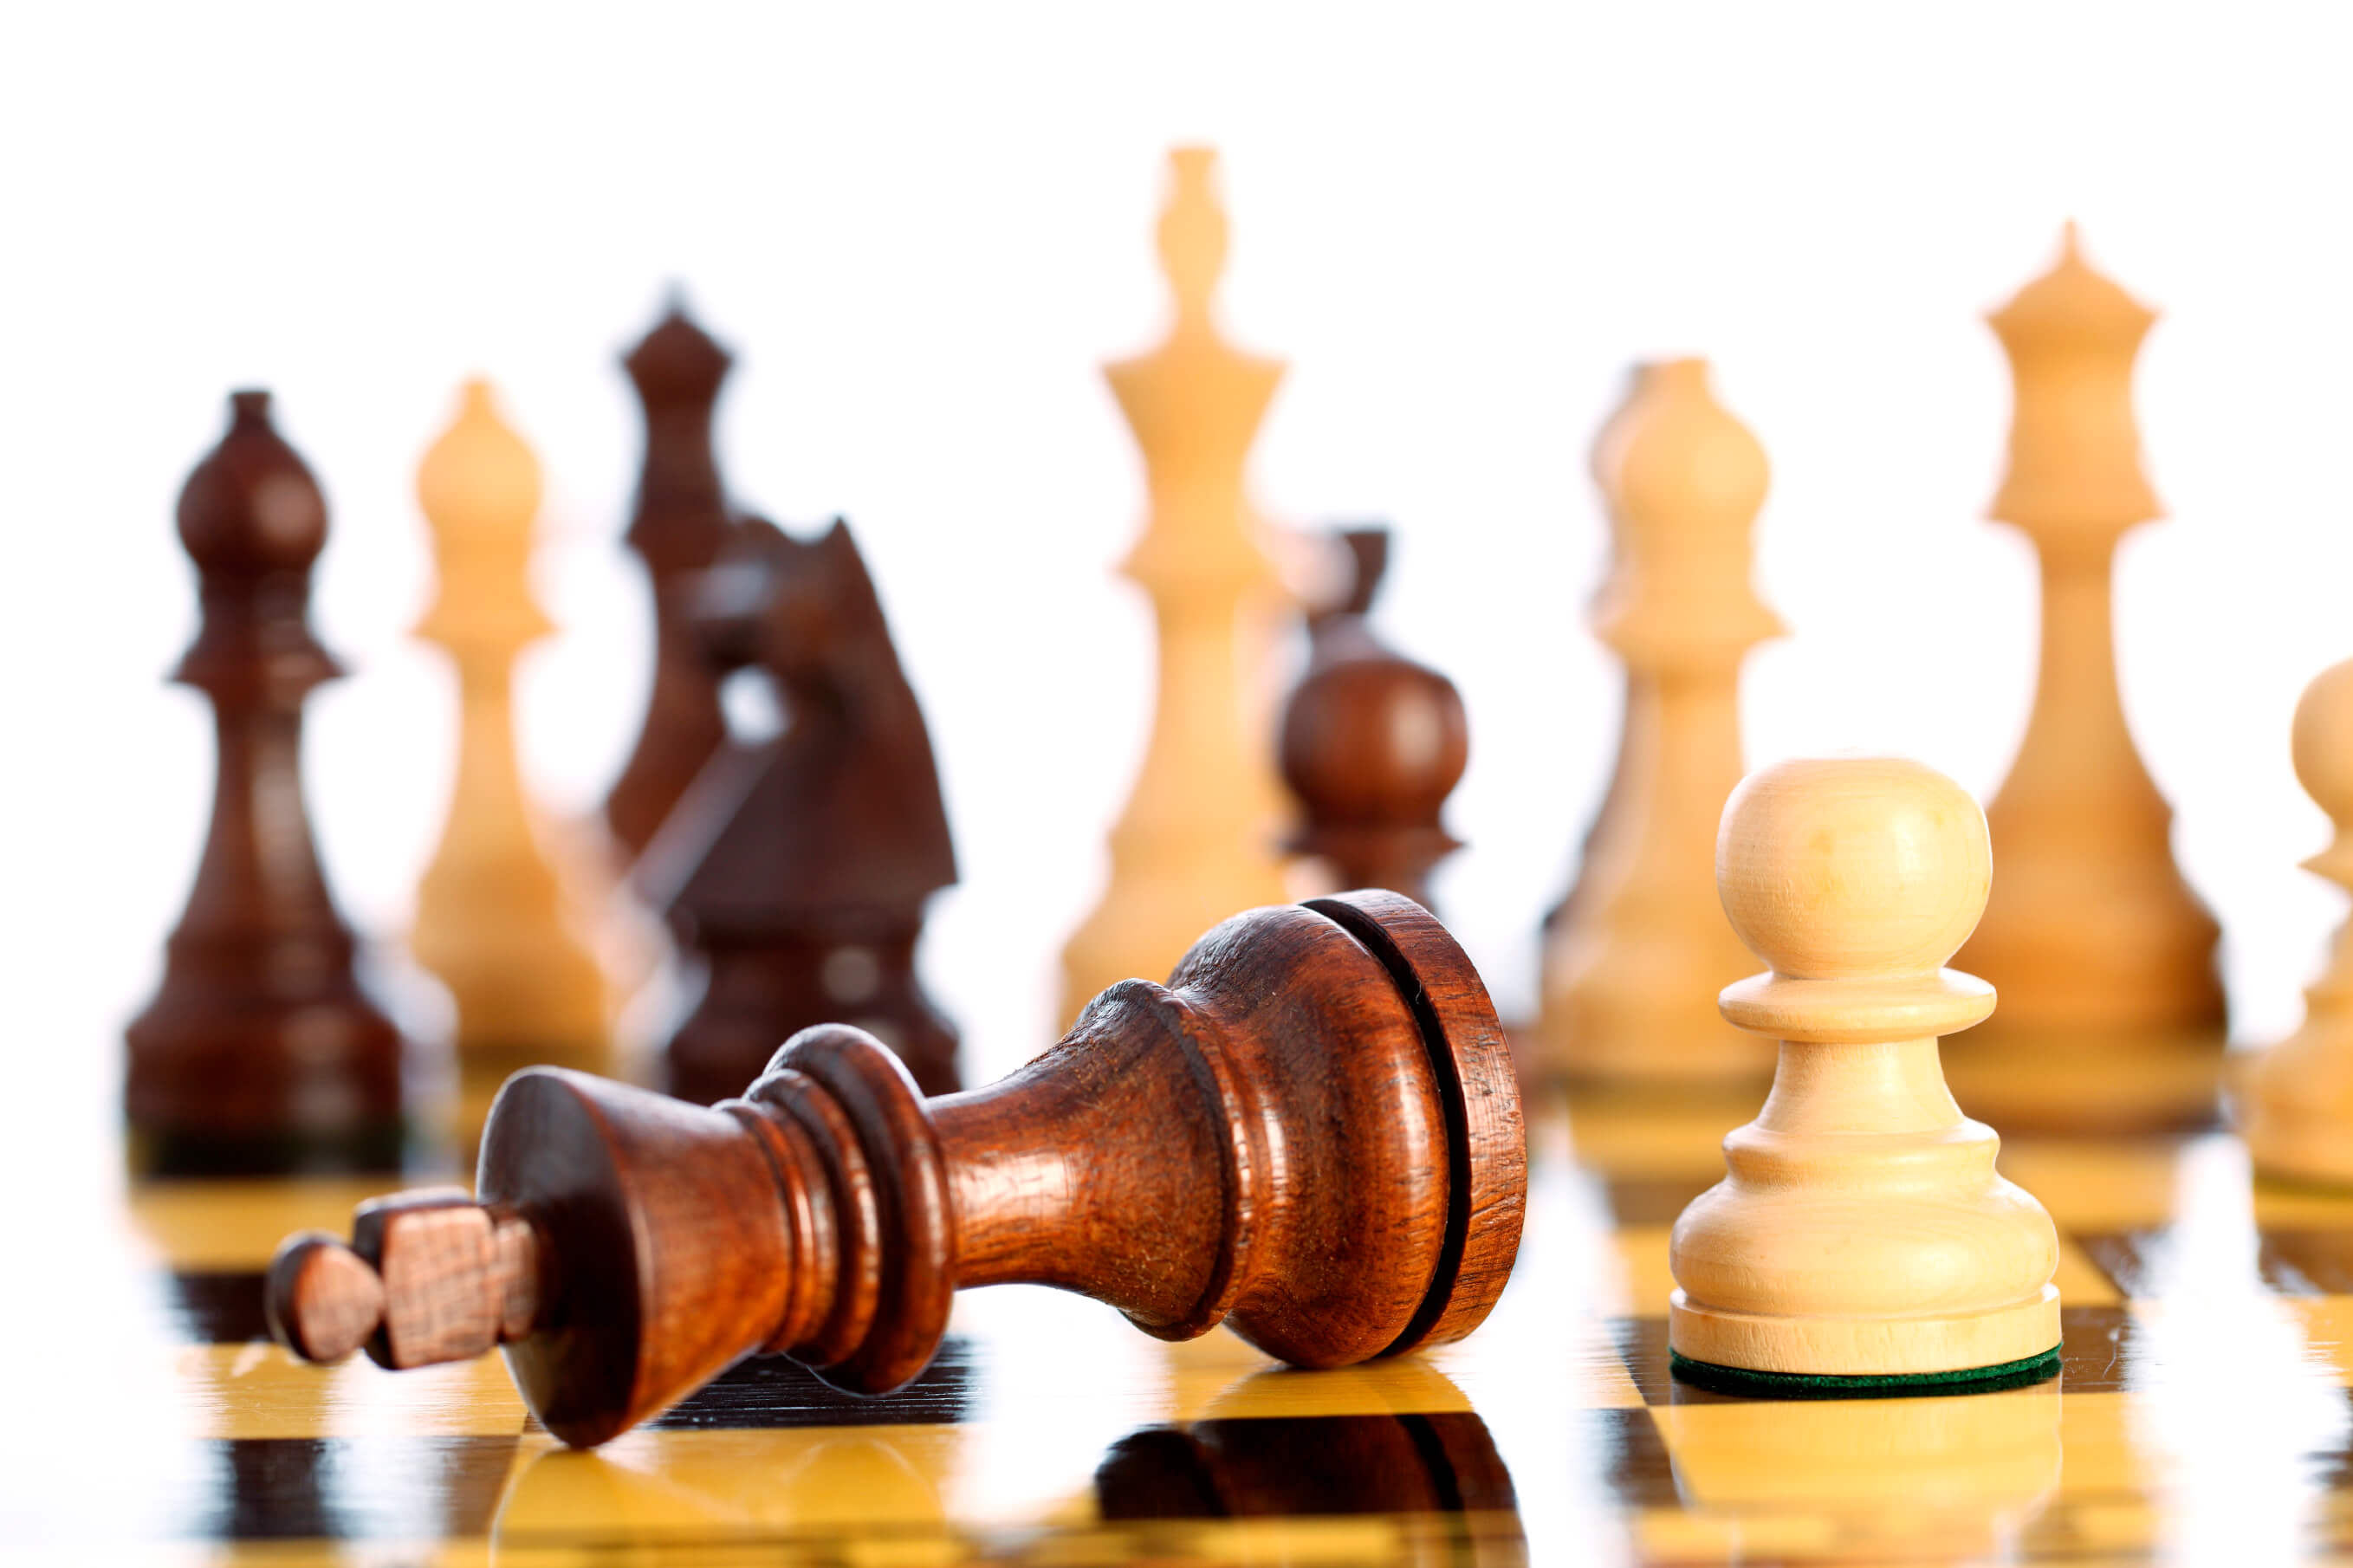 Chess game comes to an end when the king is checkmated